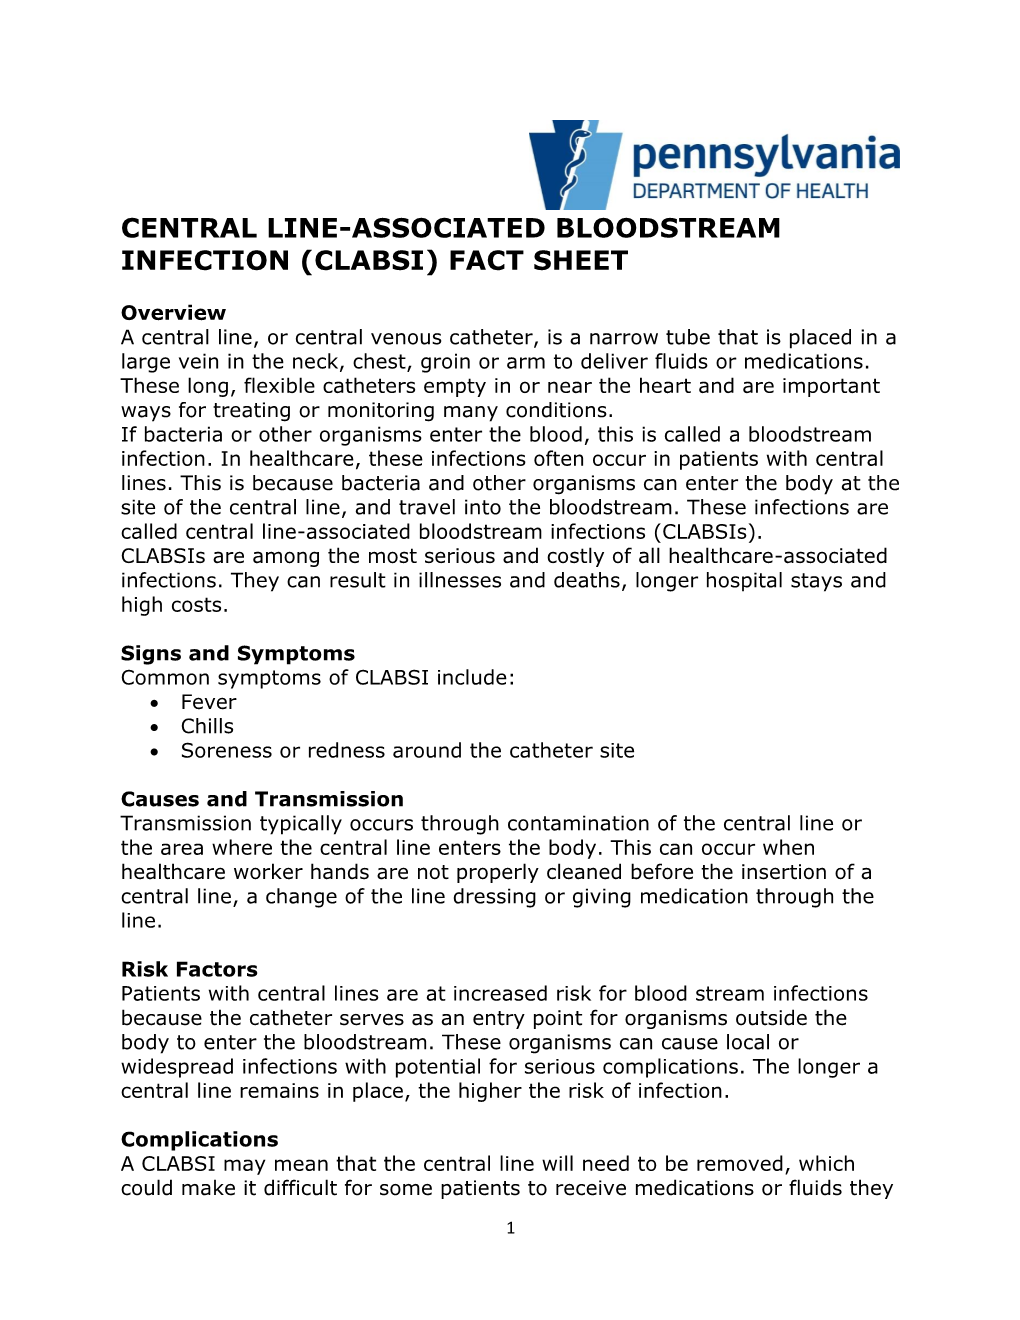 Central Line-Associated Bloodstream Infection (Clabsi) Fact Sheet